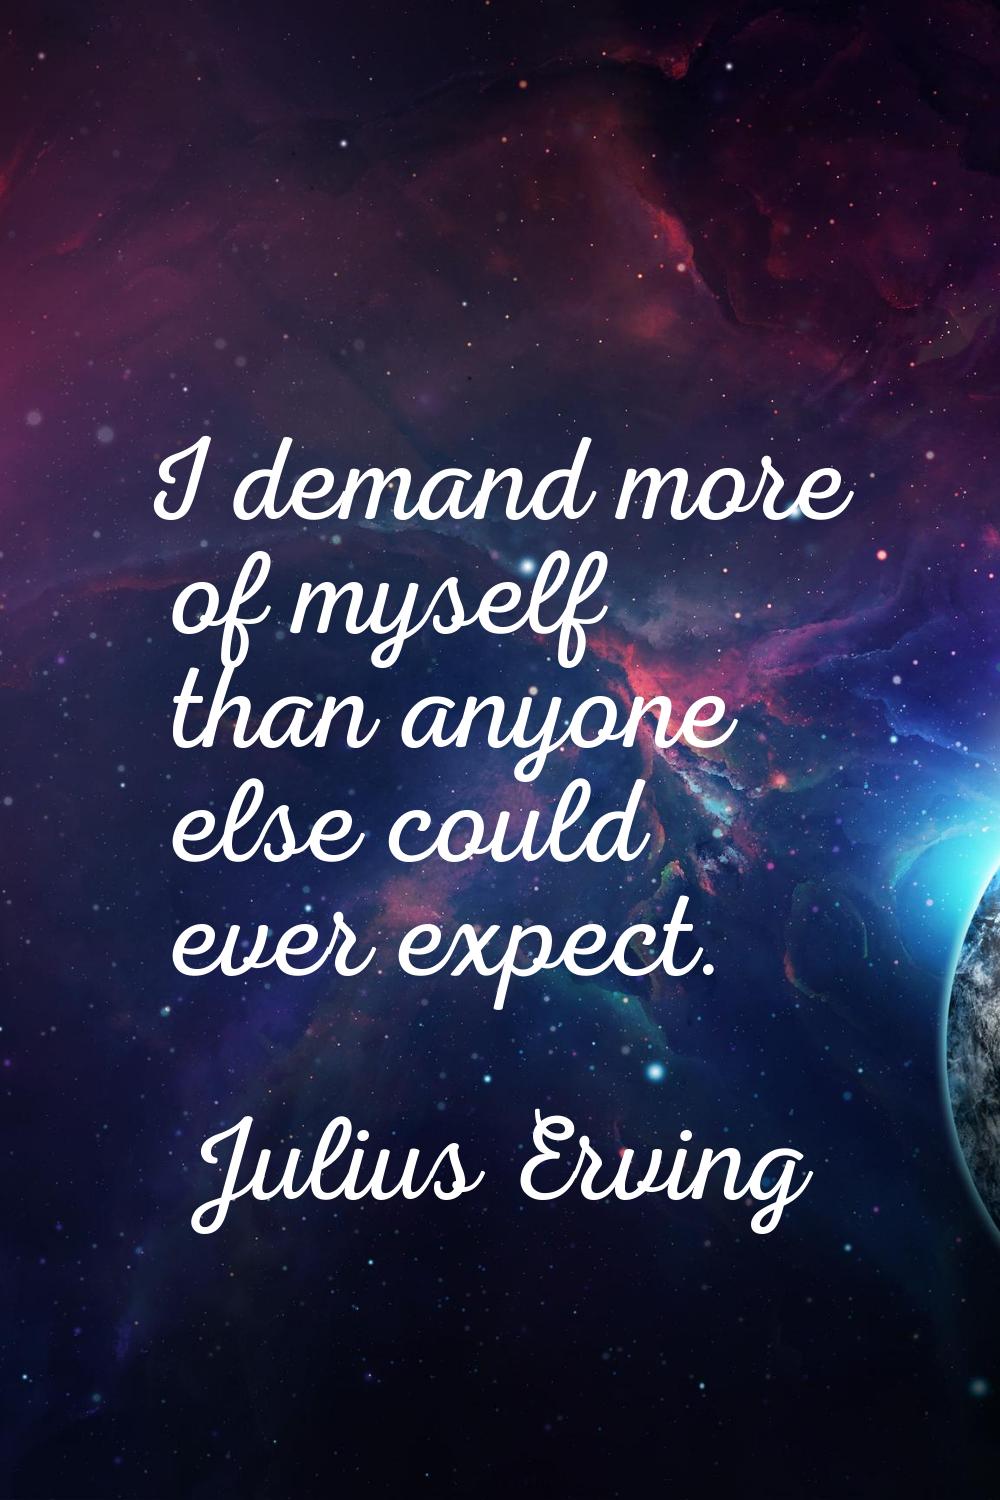 I demand more of myself than anyone else could ever expect.